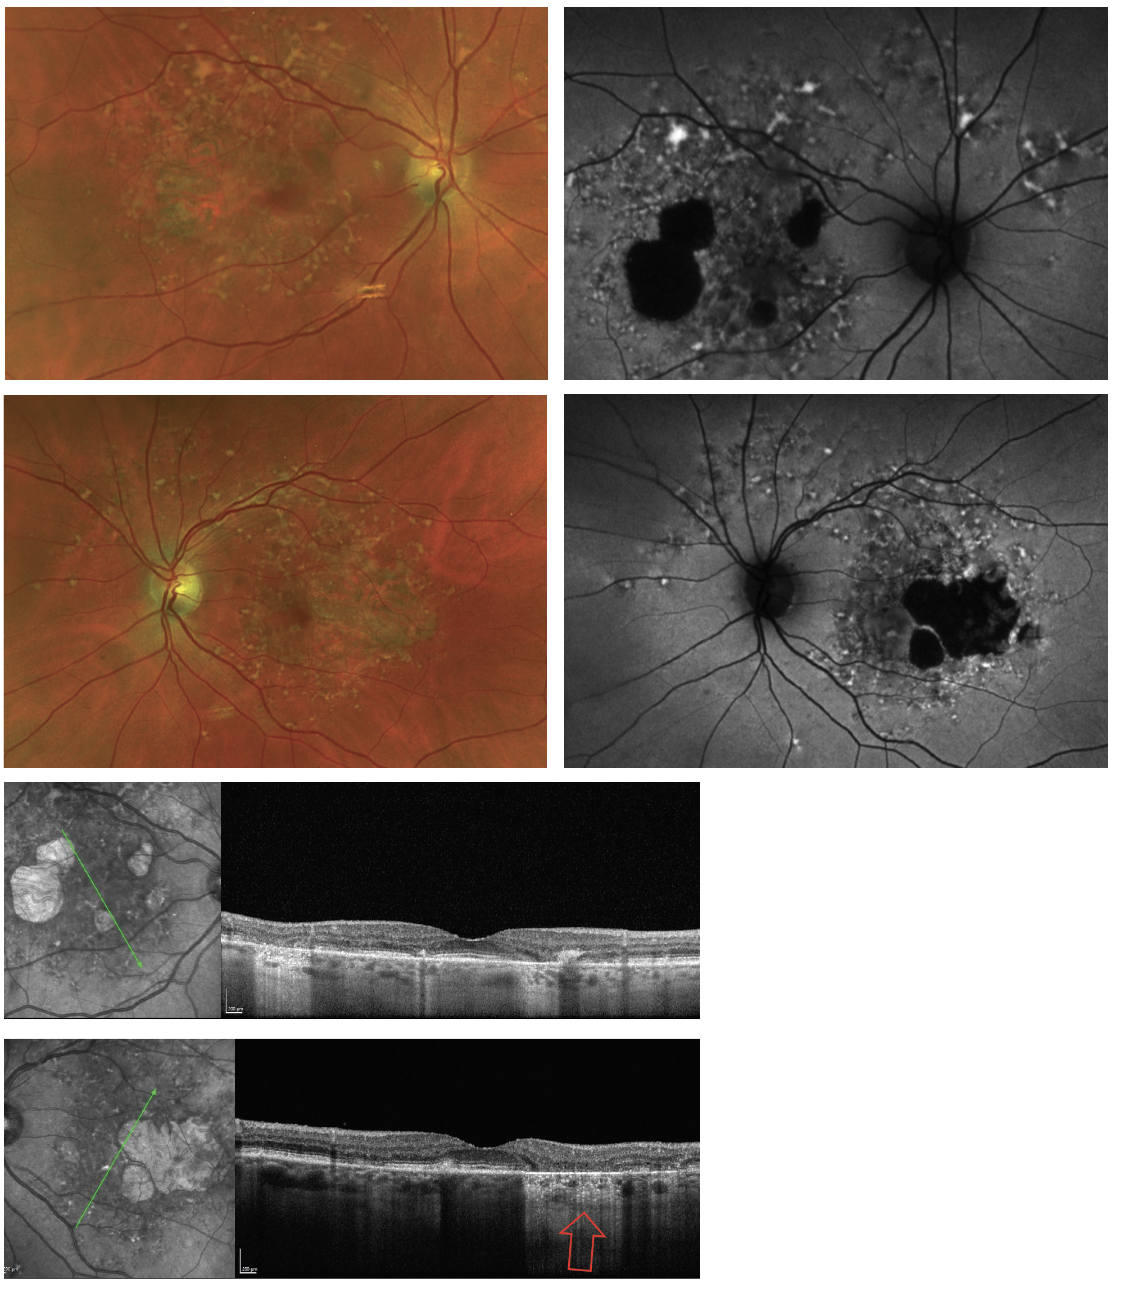 Fig. 2. The yellowish-flecked lesions shown above are pisiform and pisciform lesions. They can be visualized on fundus photos and more notably on FAF as hyperautofluorescent lesions due to accumulation and increased lipofuscin. They can also be seen as atrophic lesions noted as hypoautoflurescence on FAF and by increased hypertransmission on OCT (red arrow). These are all signs of advanced Stargardt’s disease.  